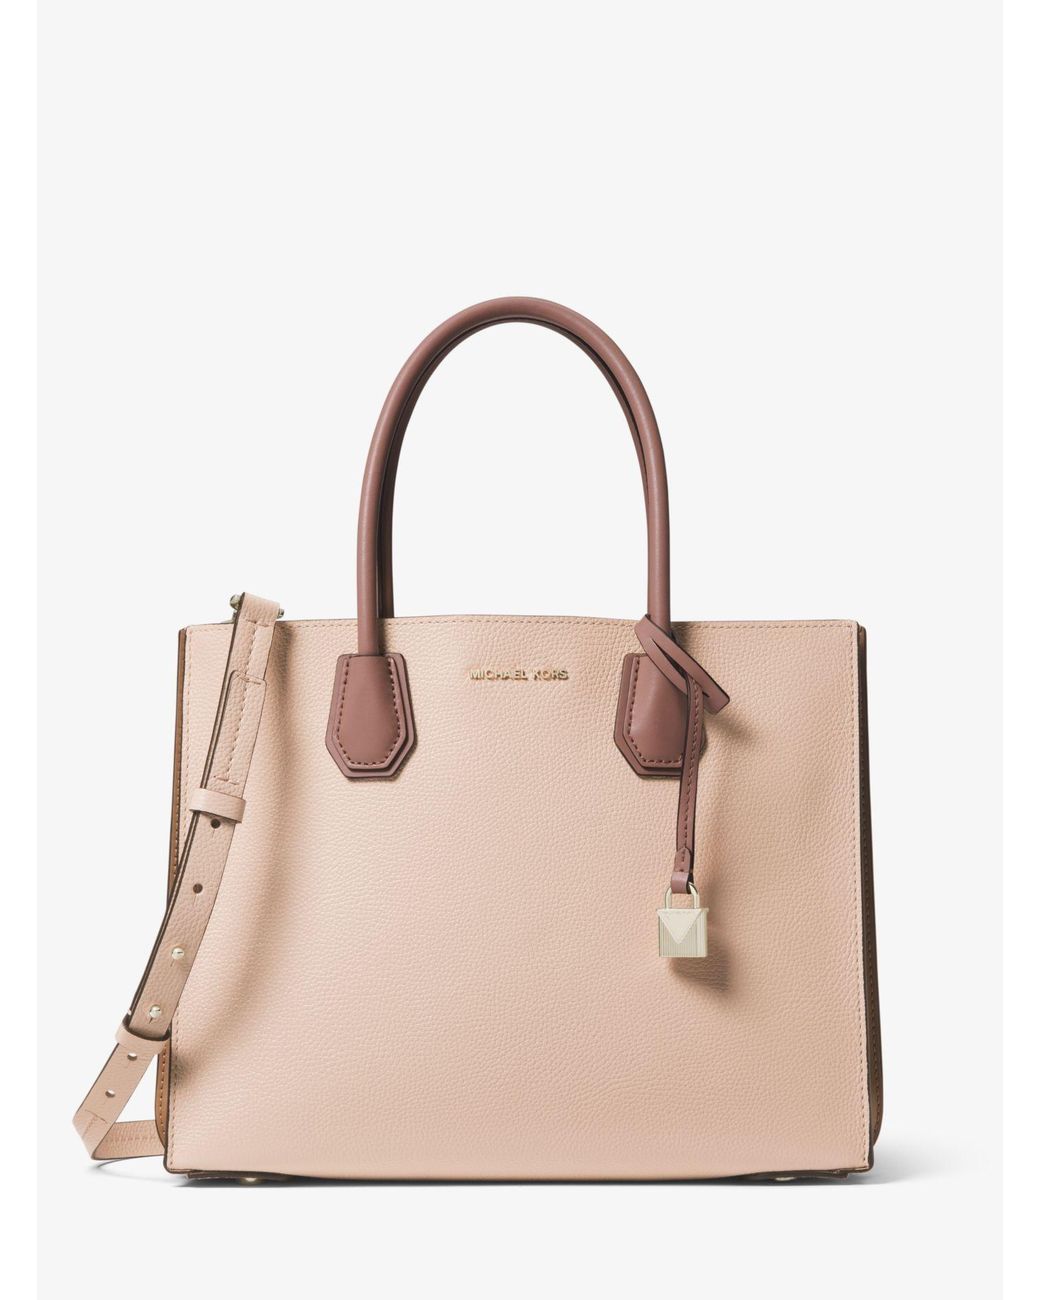 Michael+Kors+Mercer+Large+Pebbled+Leather+Accordion+Tote+Soft+Pink+30T8TM9T3L  for sale online